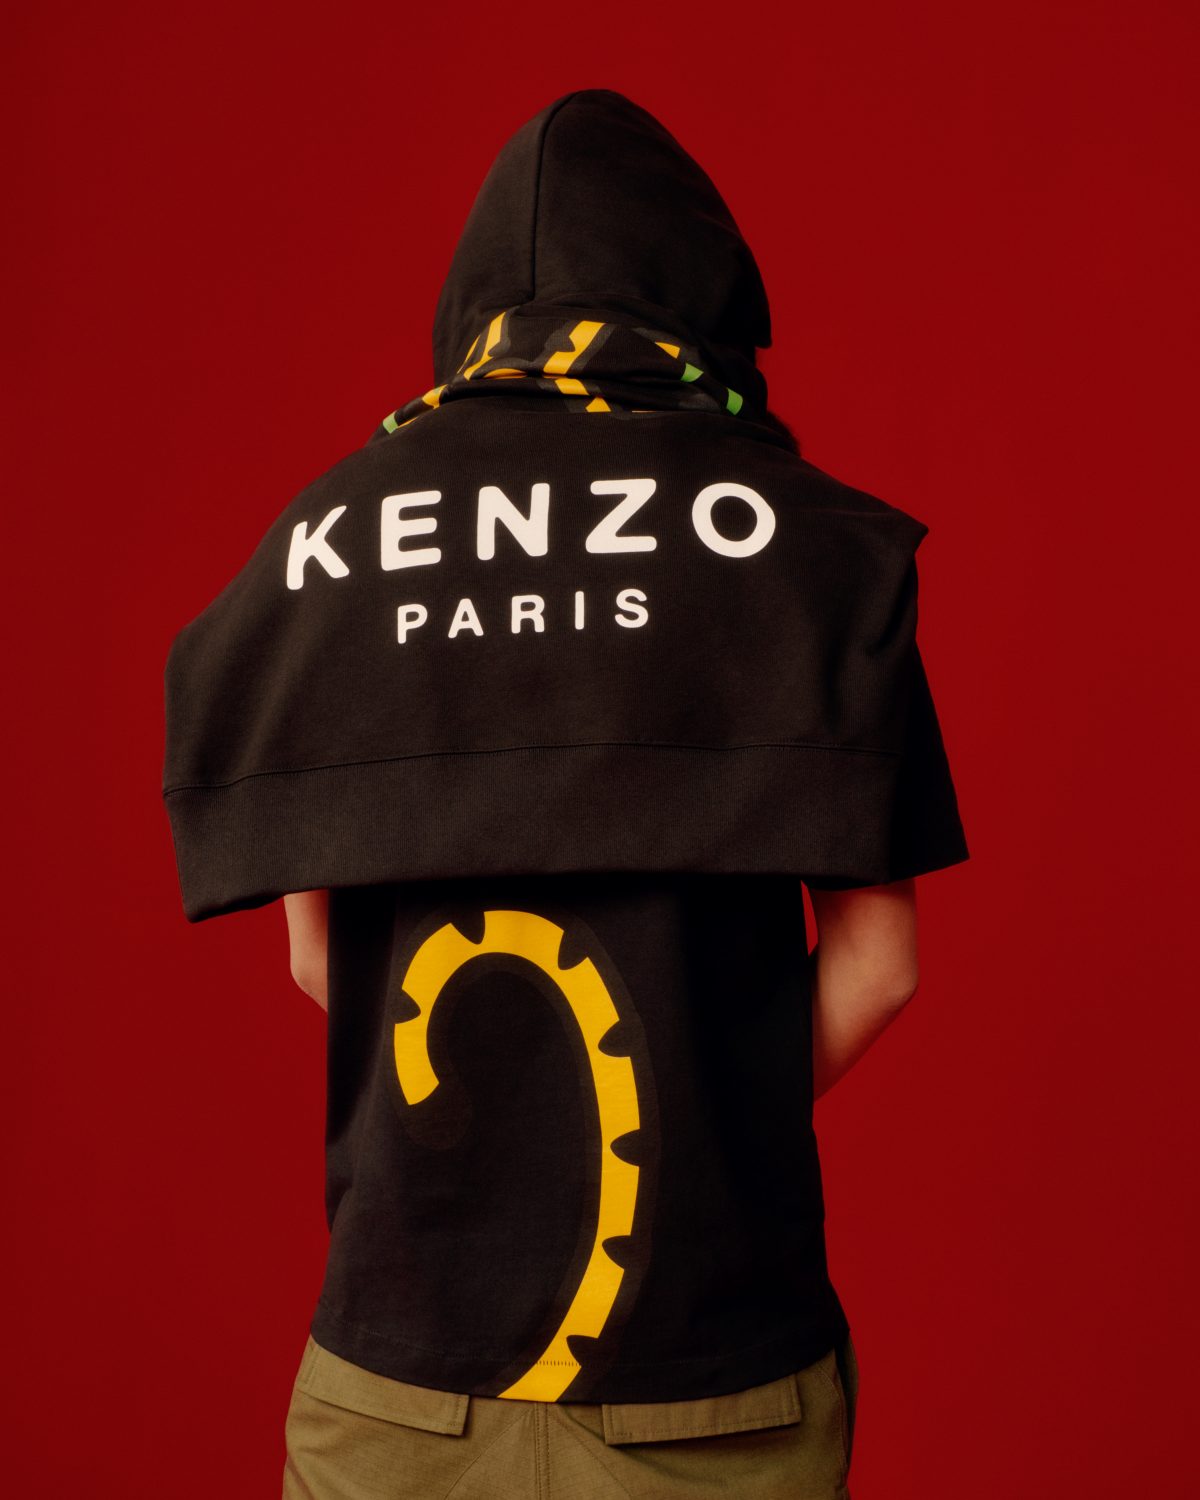 Nigo's Kenzo 2nd Limited-Edition Drop: Tiger Tail Collection